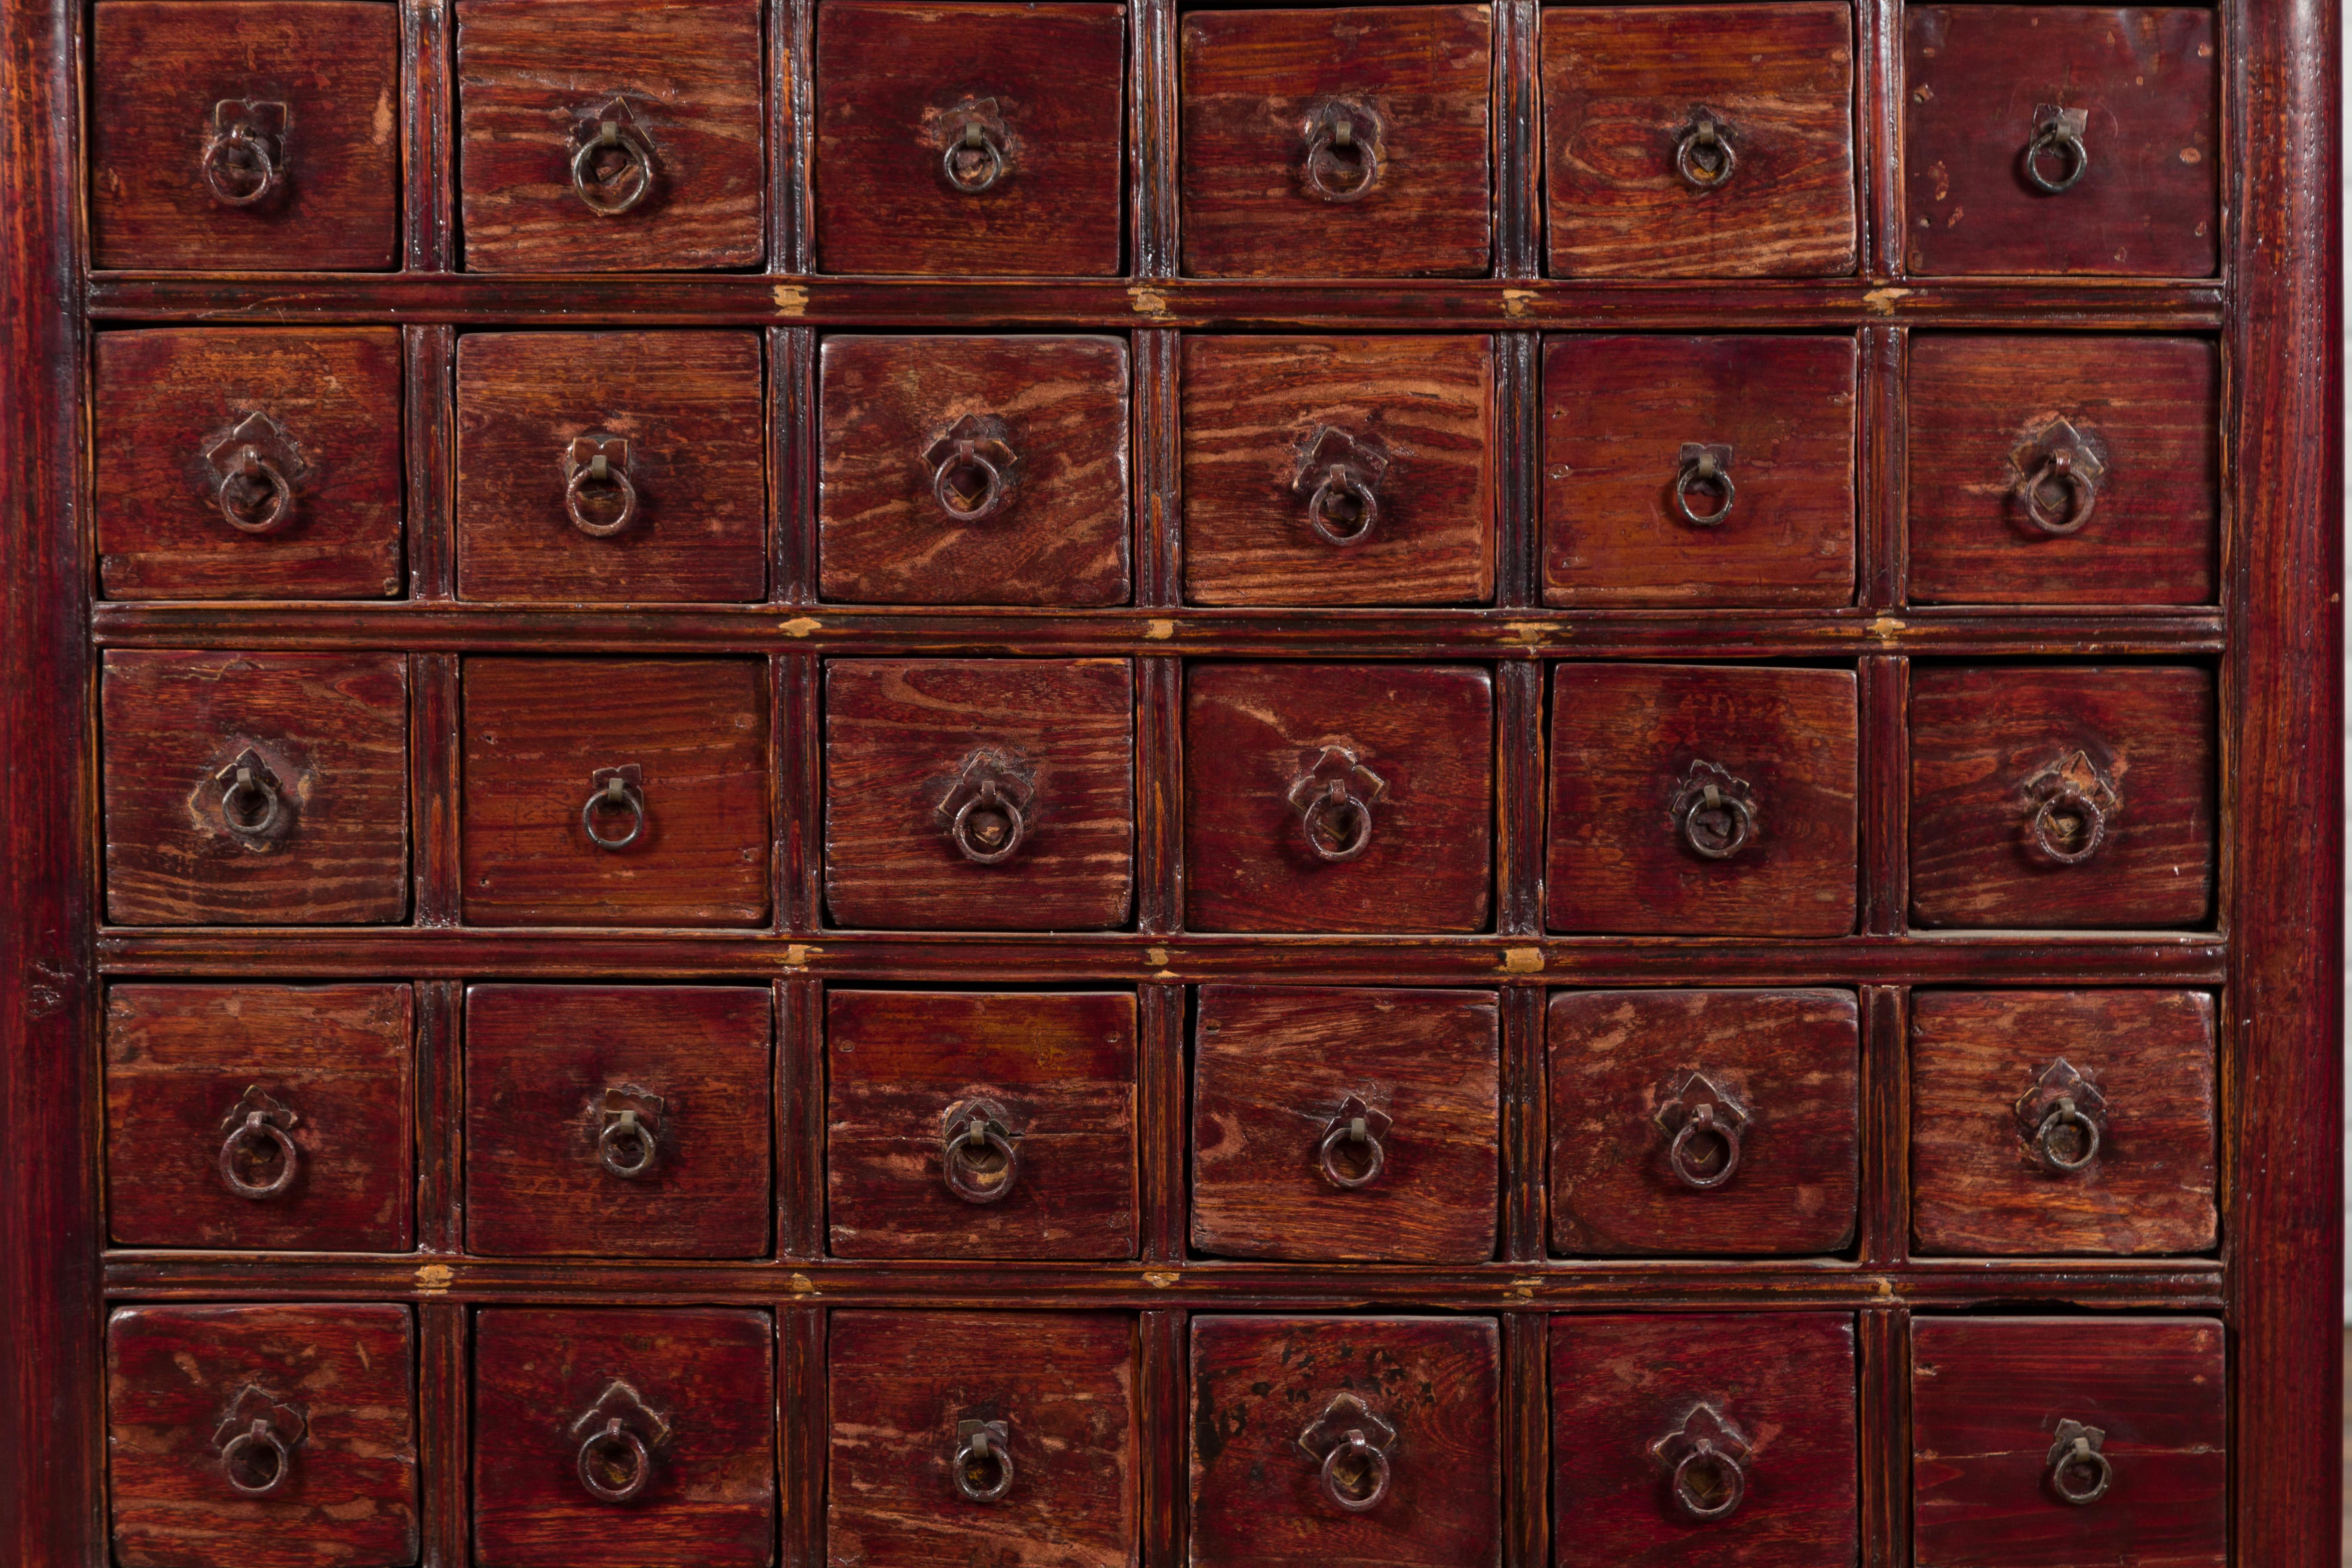 Chinese Qing Dynasty Period Apothecary Chest with 32 Drawers and Aged Patina For Sale 3